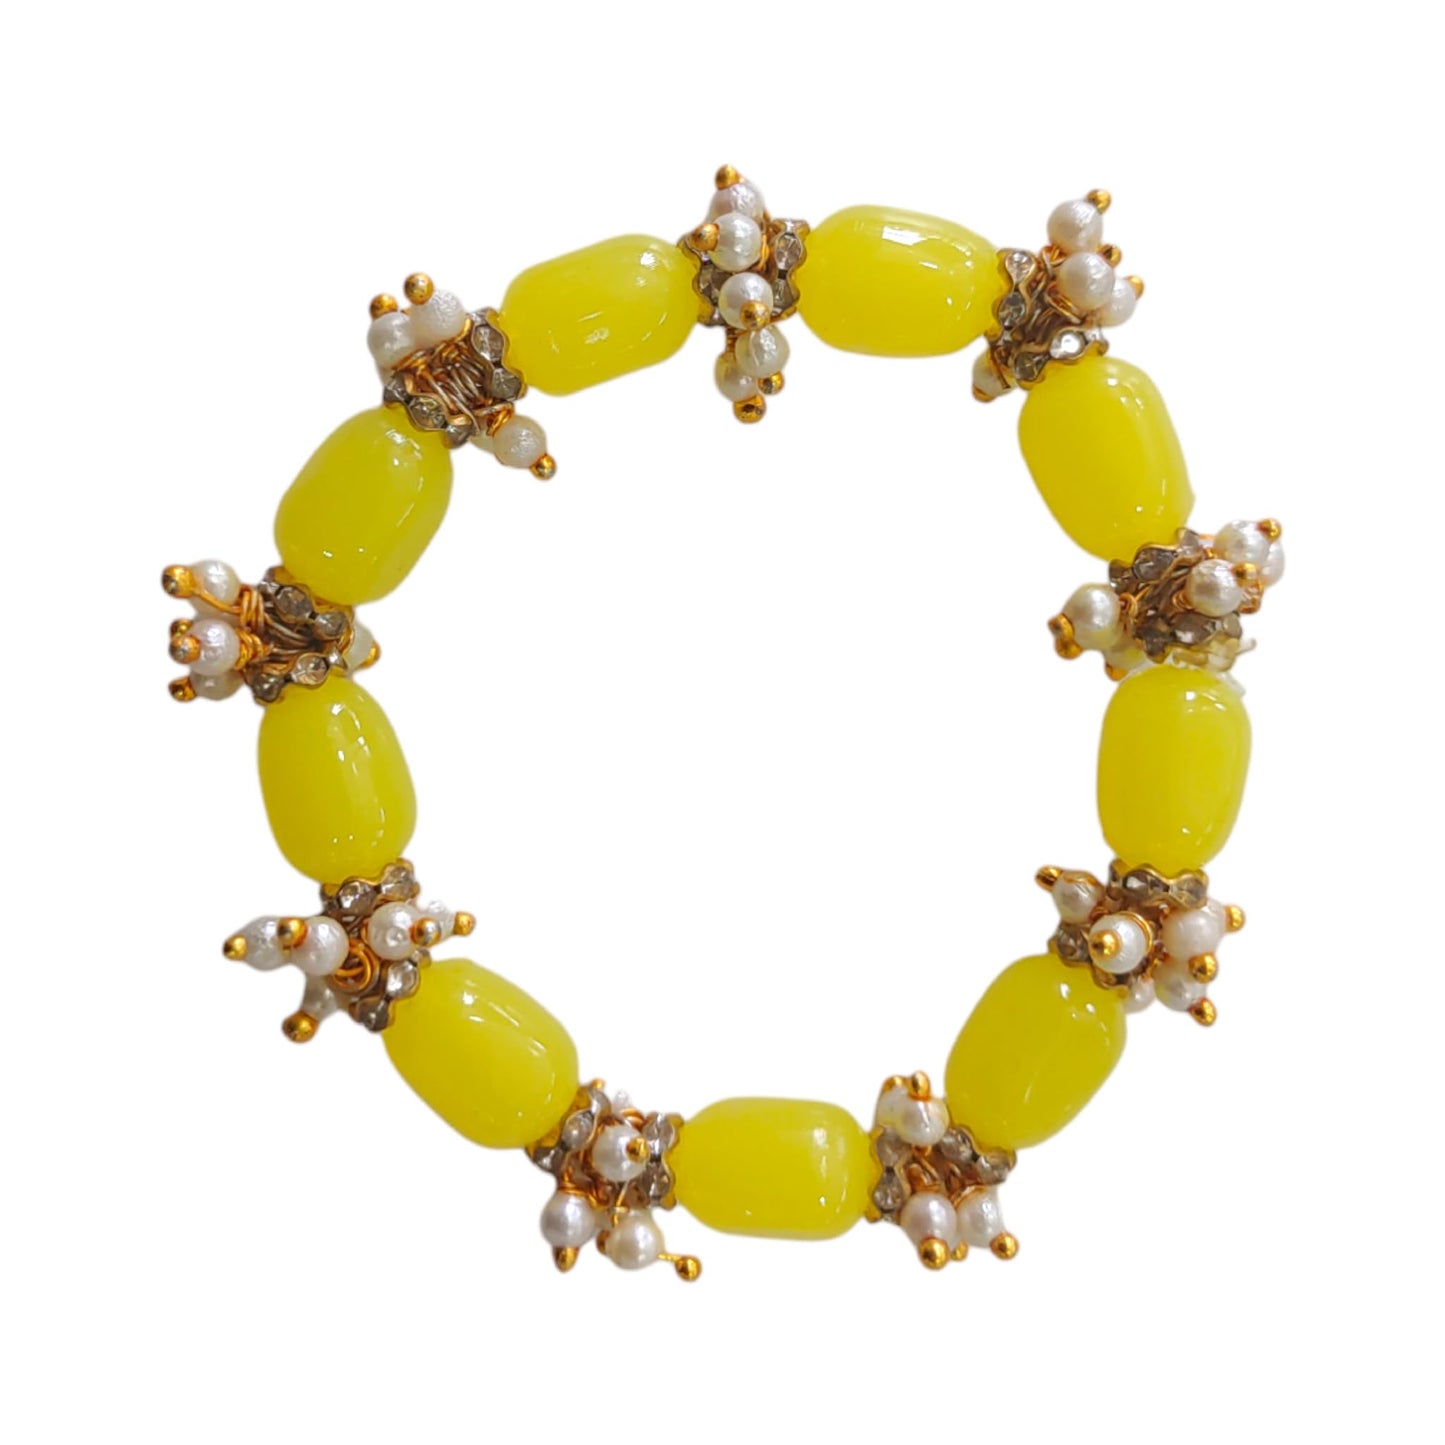 Indian Petals Bracelet, Necklace, Jewellery Making Raw Material For Crafting or Art - (Glass Beads, Dimond Cut Ring Motif, Loran Bead, Elastic Code ) (Style 1)